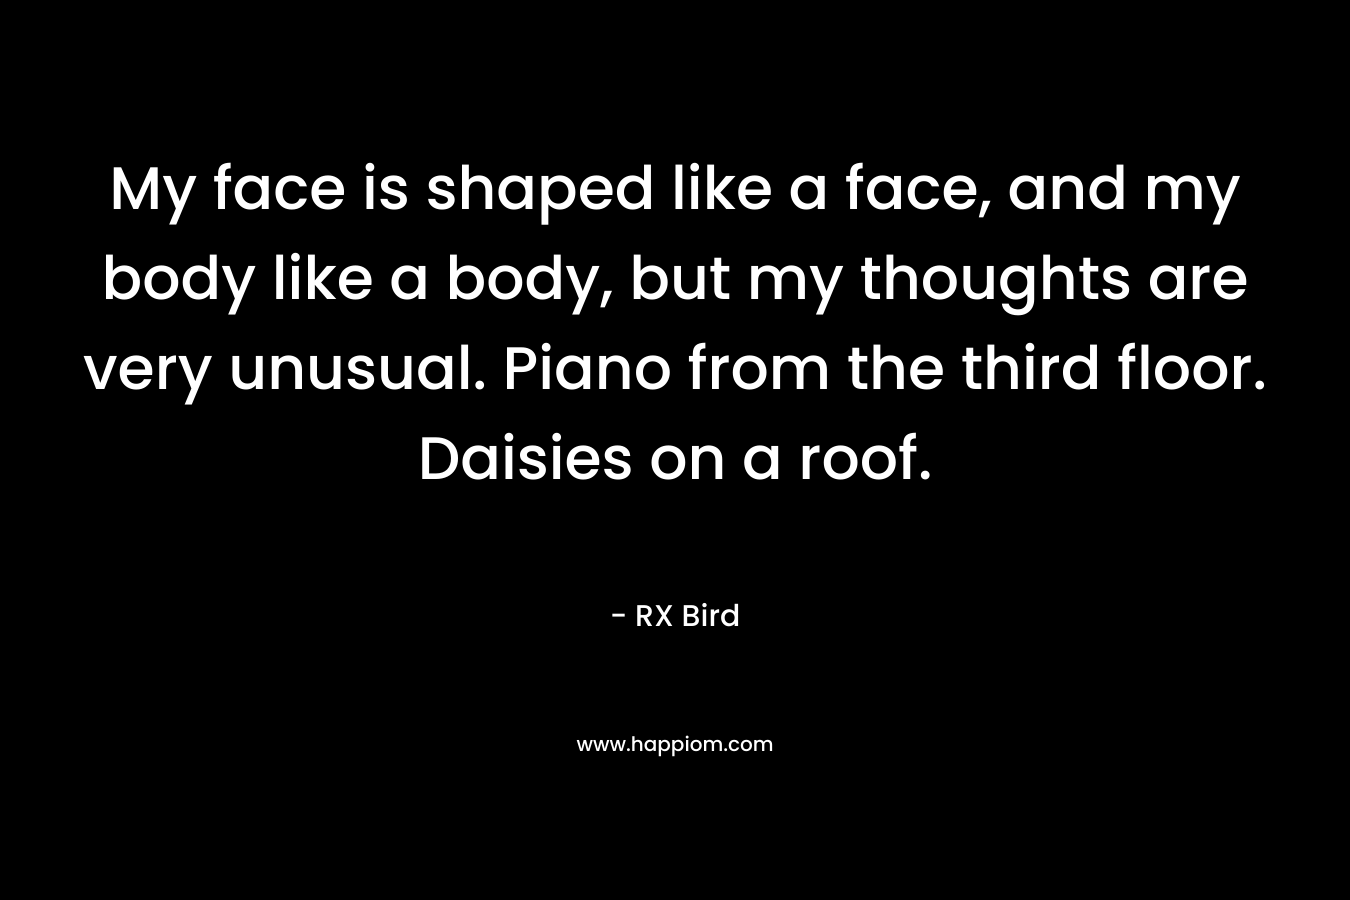 My face is shaped like a face, and my body like a body, but my thoughts are very unusual. Piano from the third floor. Daisies on a roof. – RX Bird